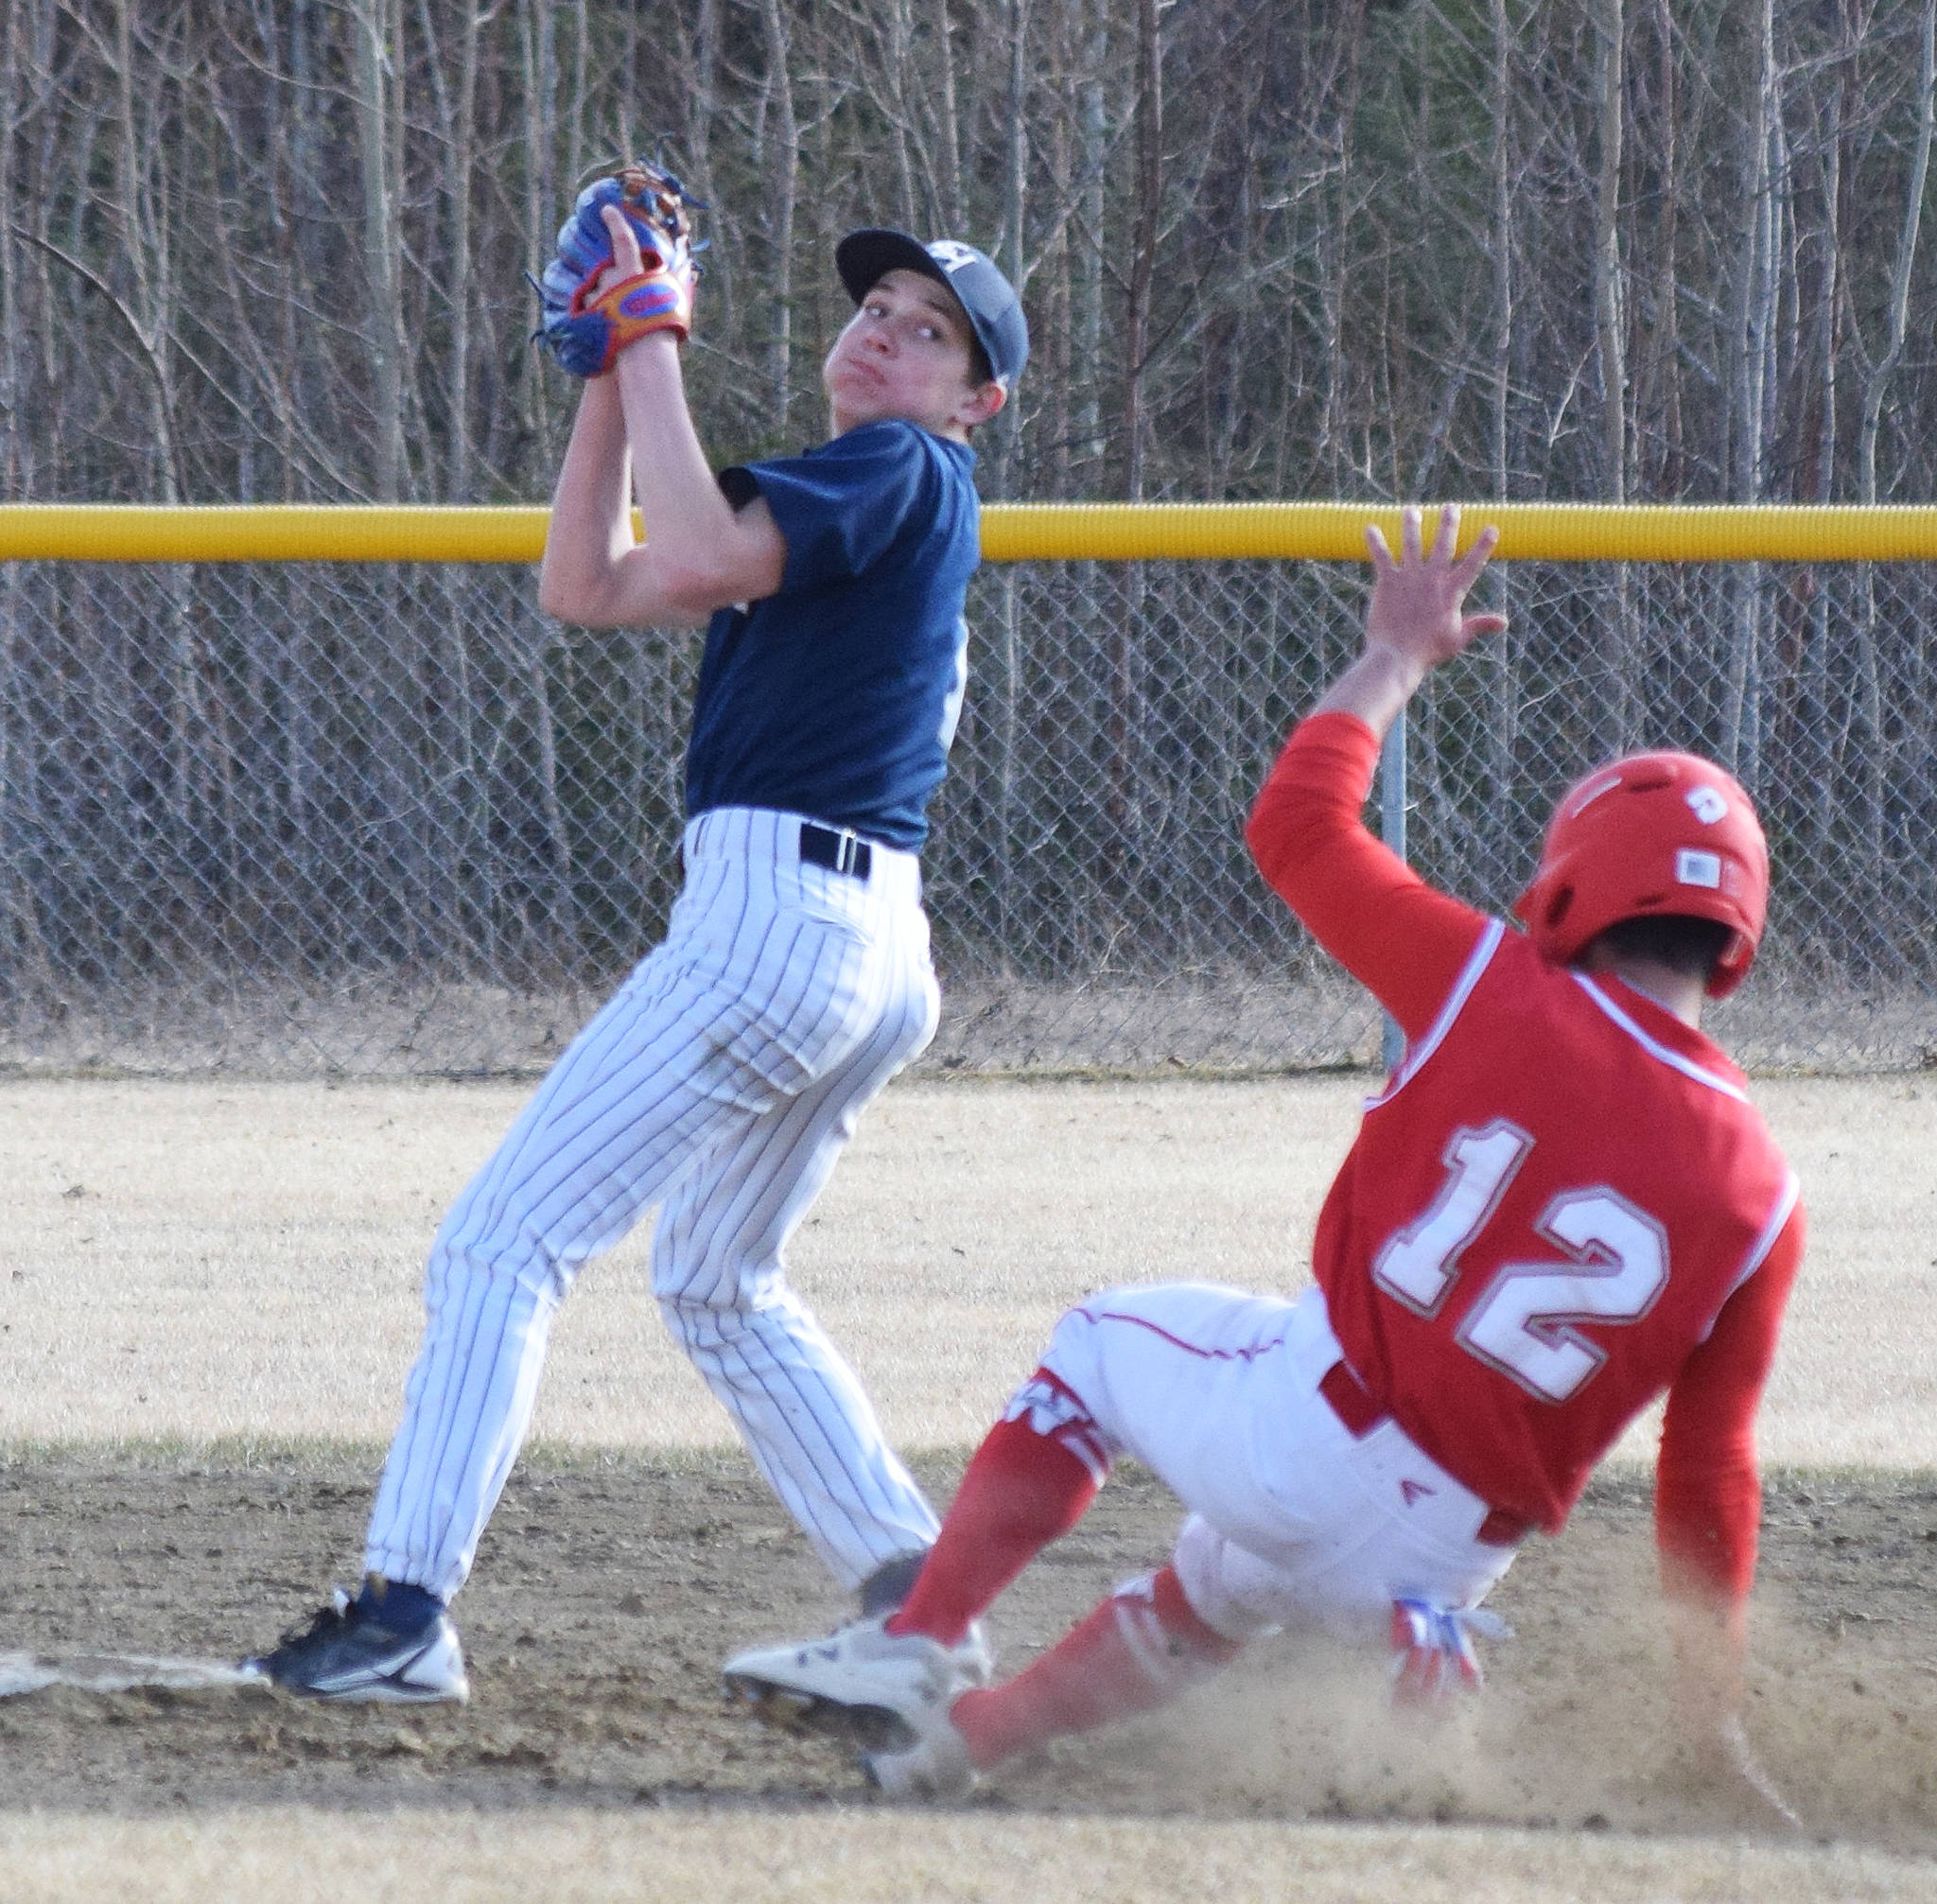 Soldotna second baseman Jacob Belger attempts to turn a double play against Wasilla in a Southcentral Conference contest Thursday, May 2, 2019, at the Soldotna Baseball Fields. (Photo by Joey Klecka/Peninsula Clarion)